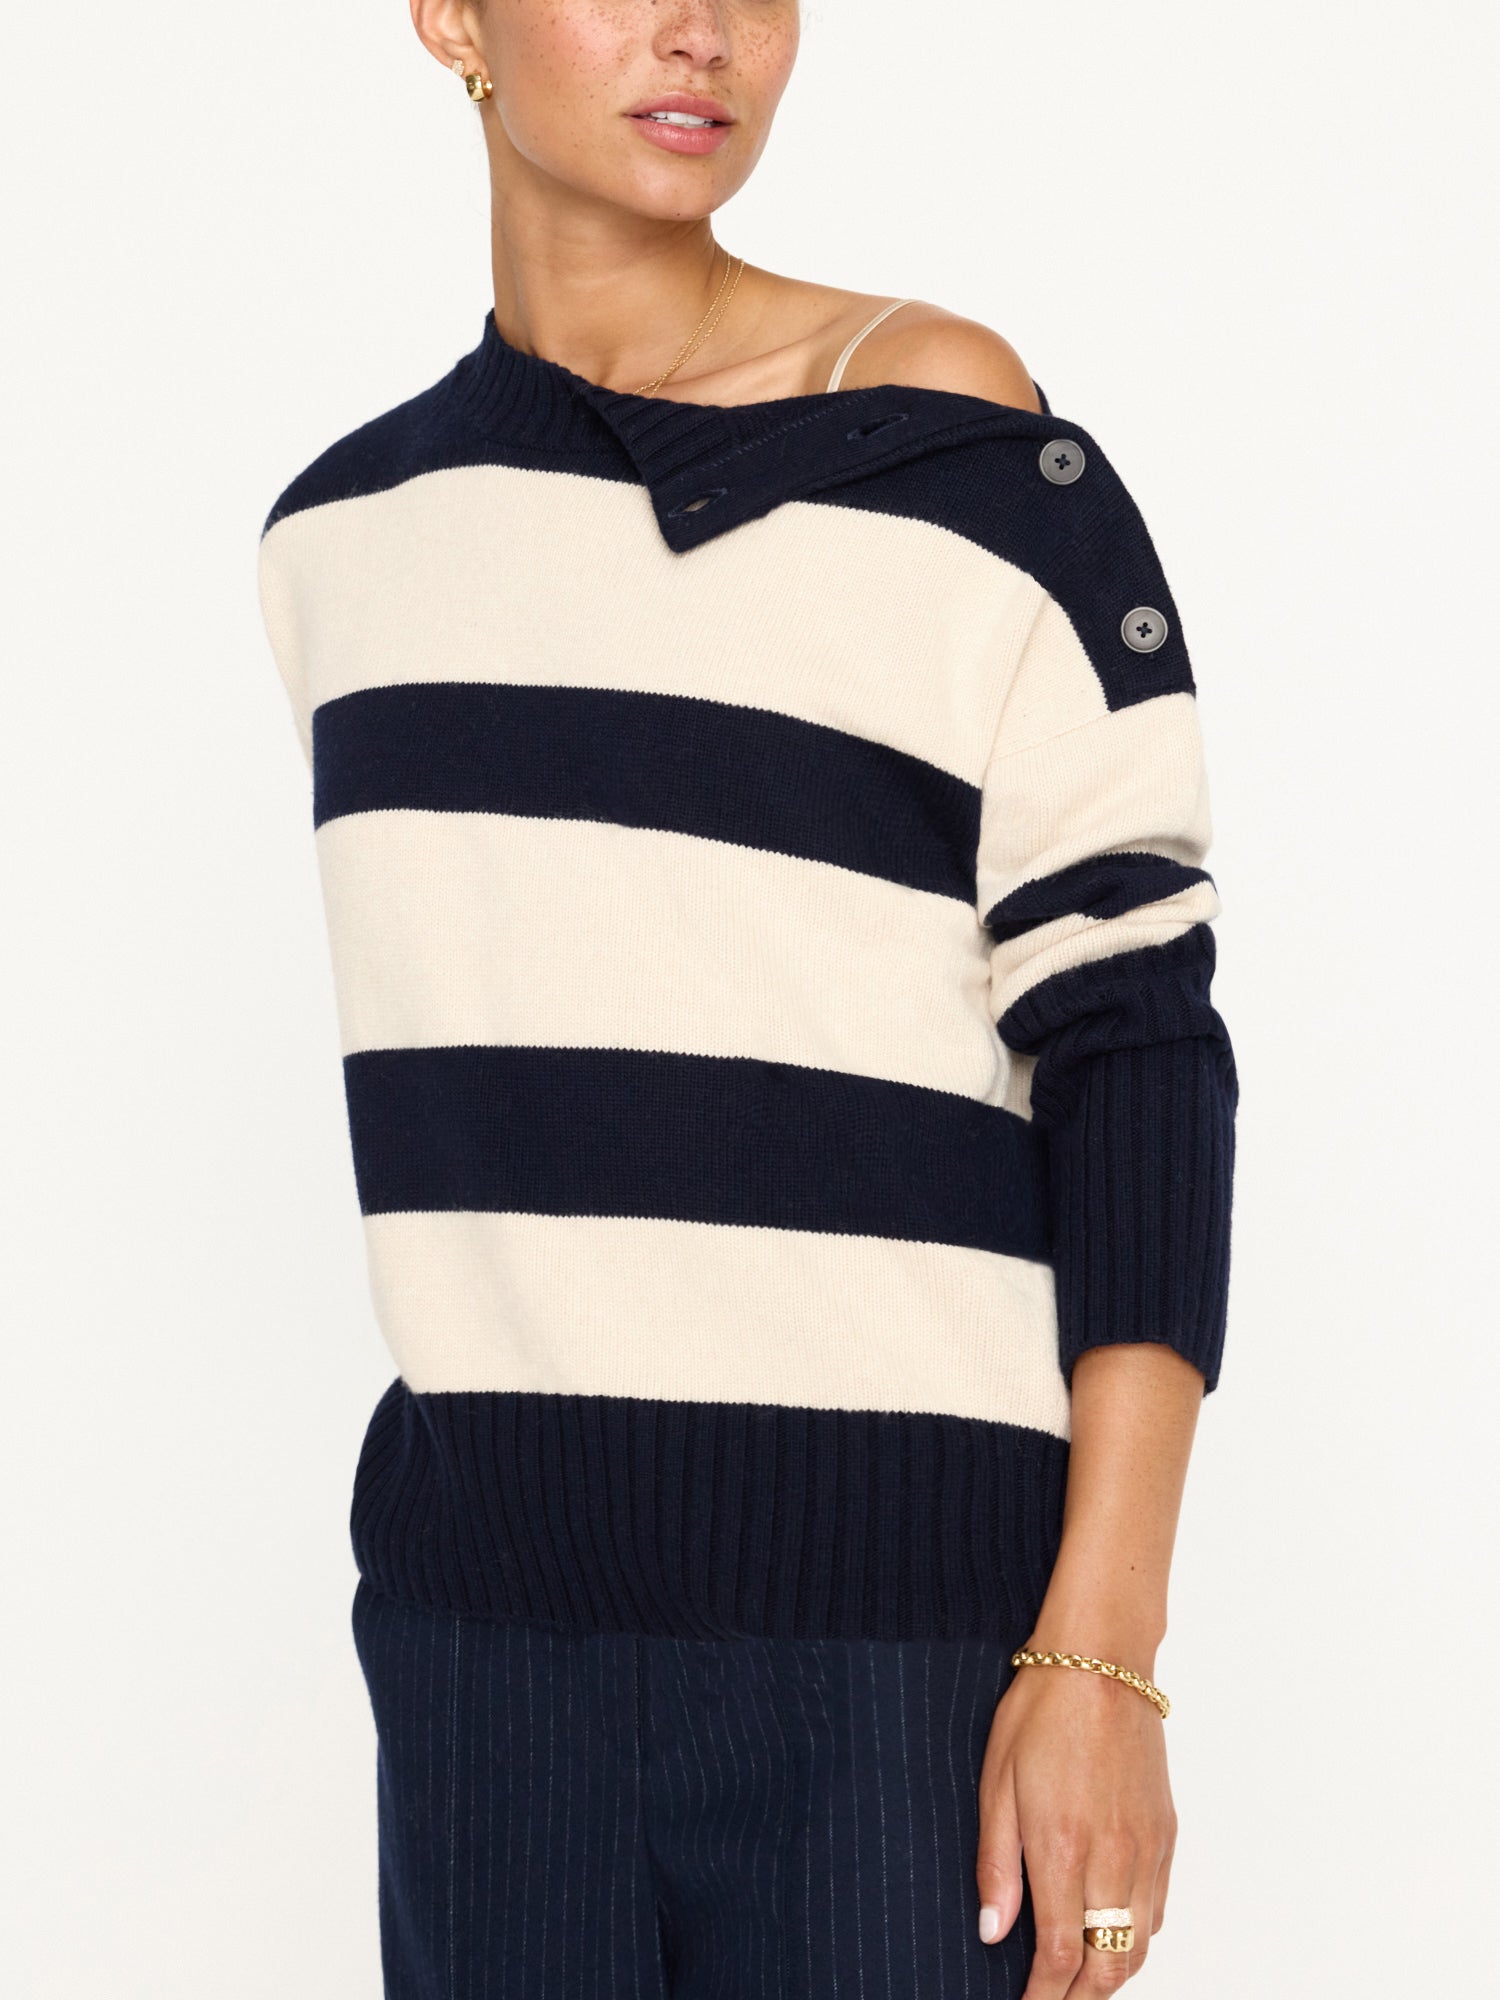 Cy navy and beige stripe crewneck sweater front view 4